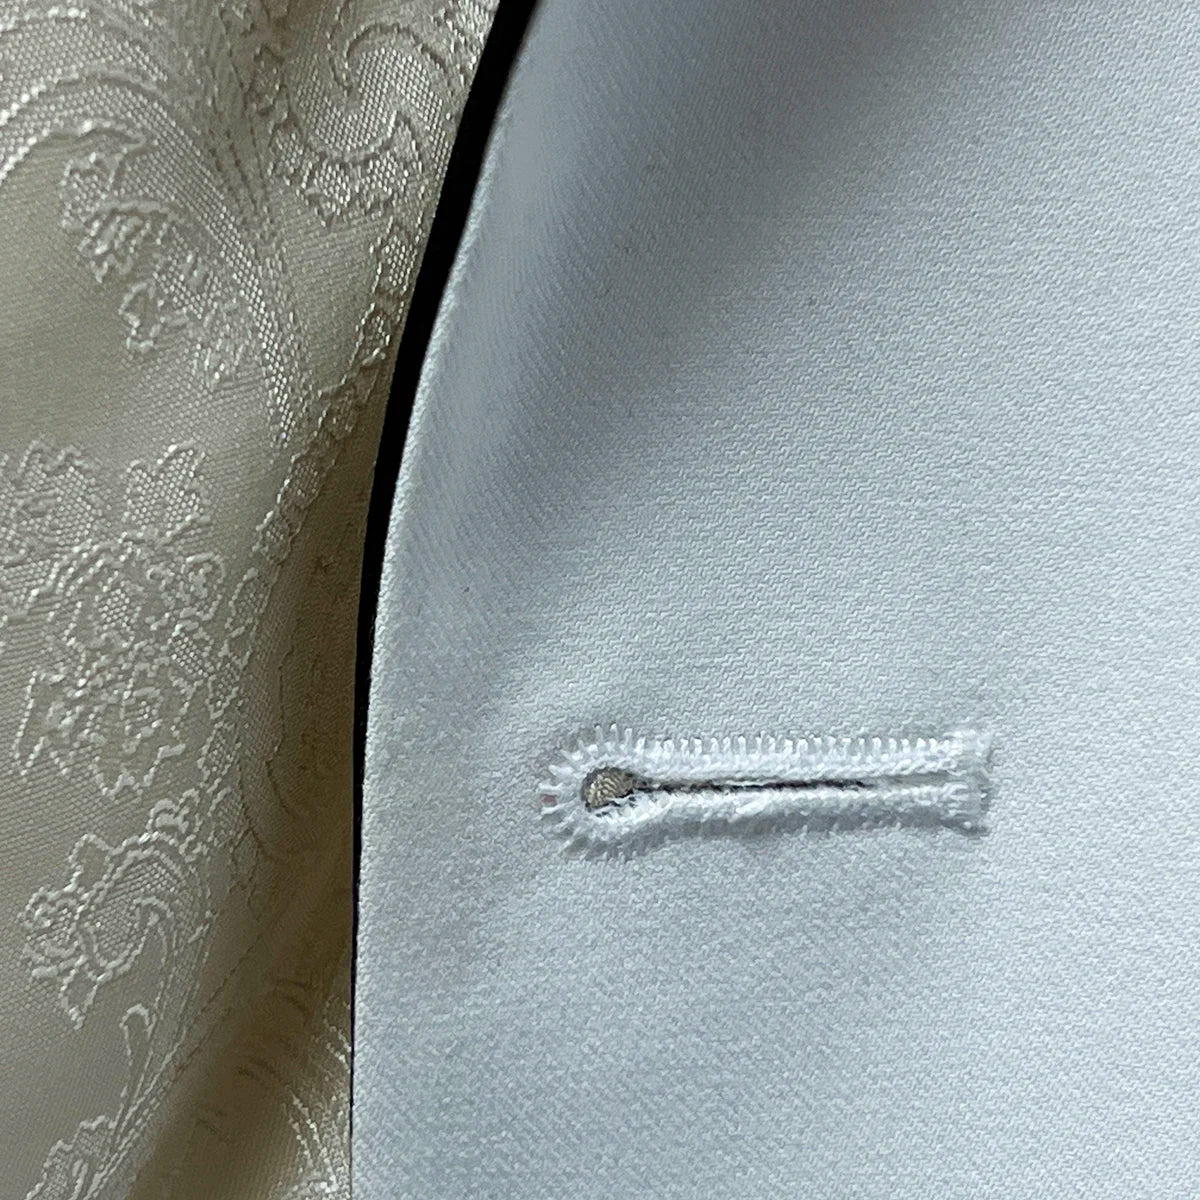 Detailed view of the buttonhole stitching on the ivory tuxedo jacket, emphasizing the fine tailoring and black satin accents.